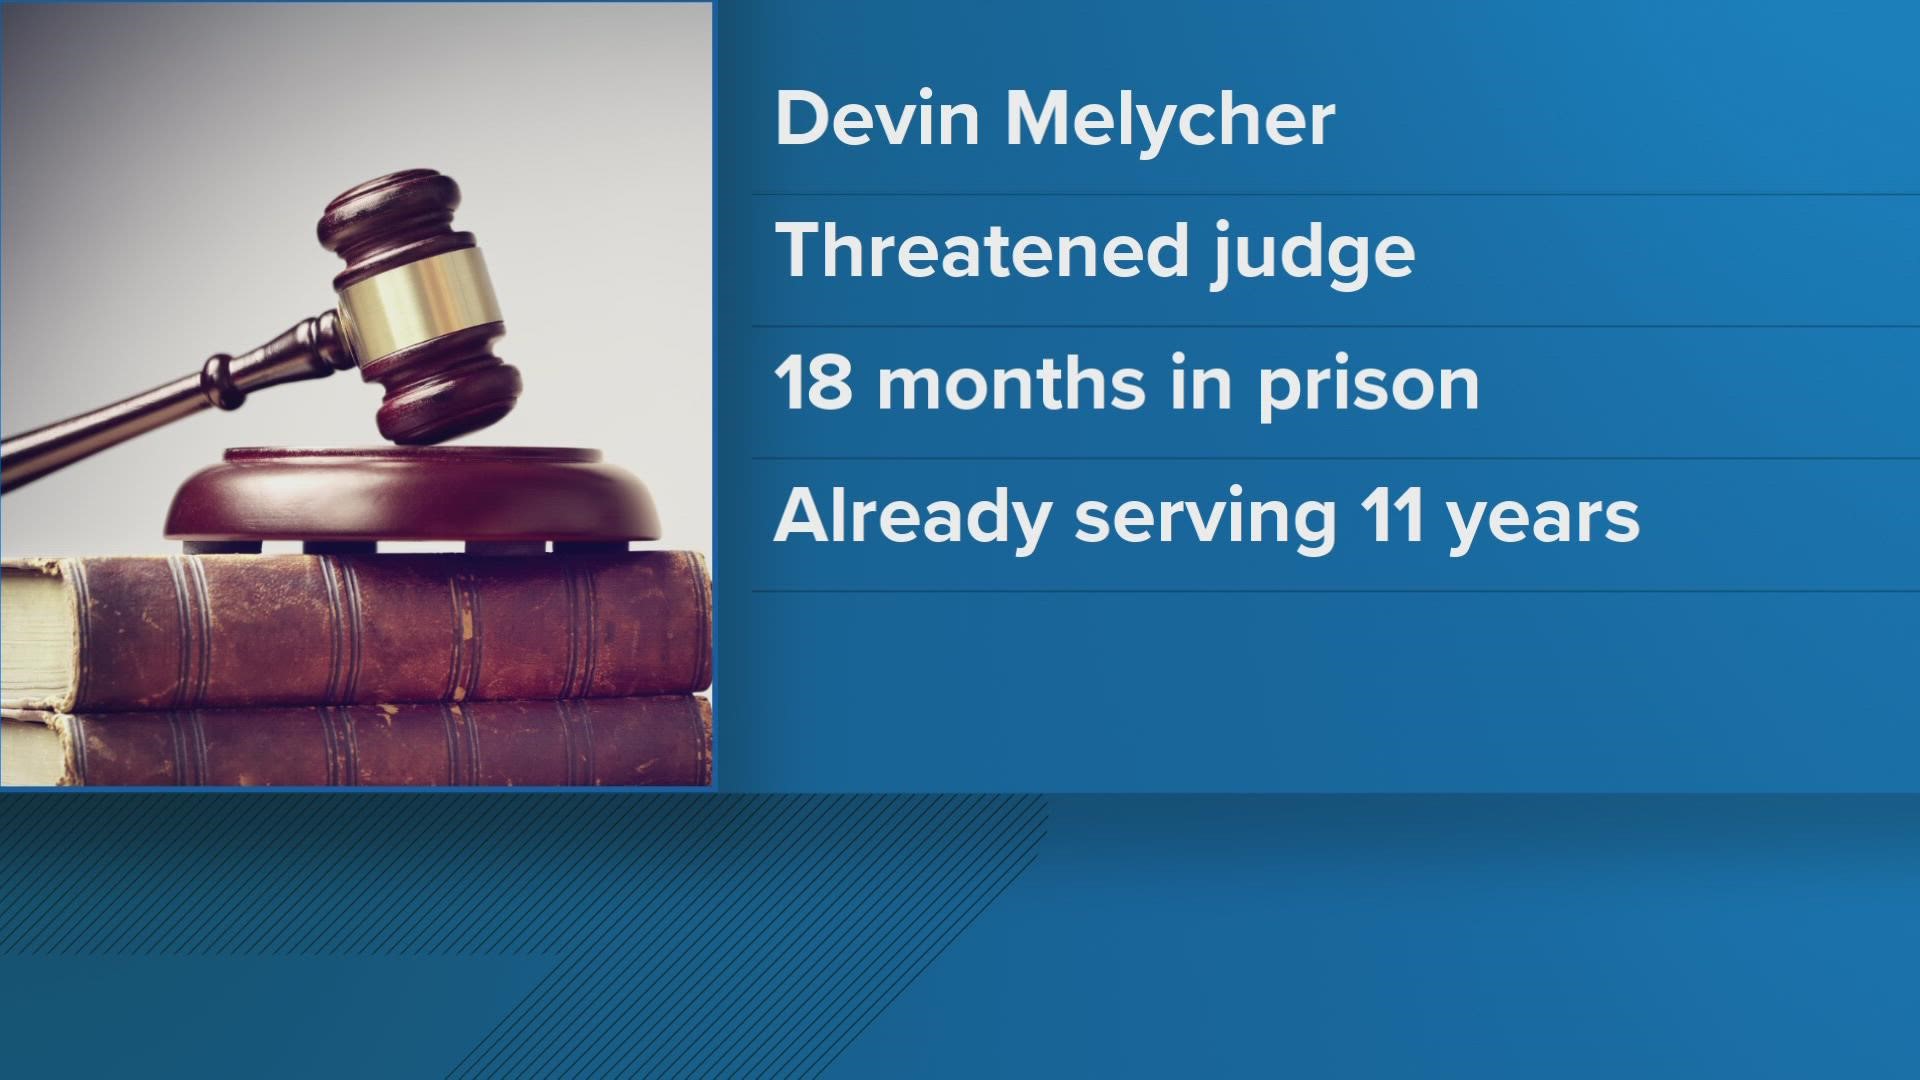 Devin Melycher will also be on supervised release for three years. He's already serving 11 years in prison for traveling to Maine to sexually assault a minor.